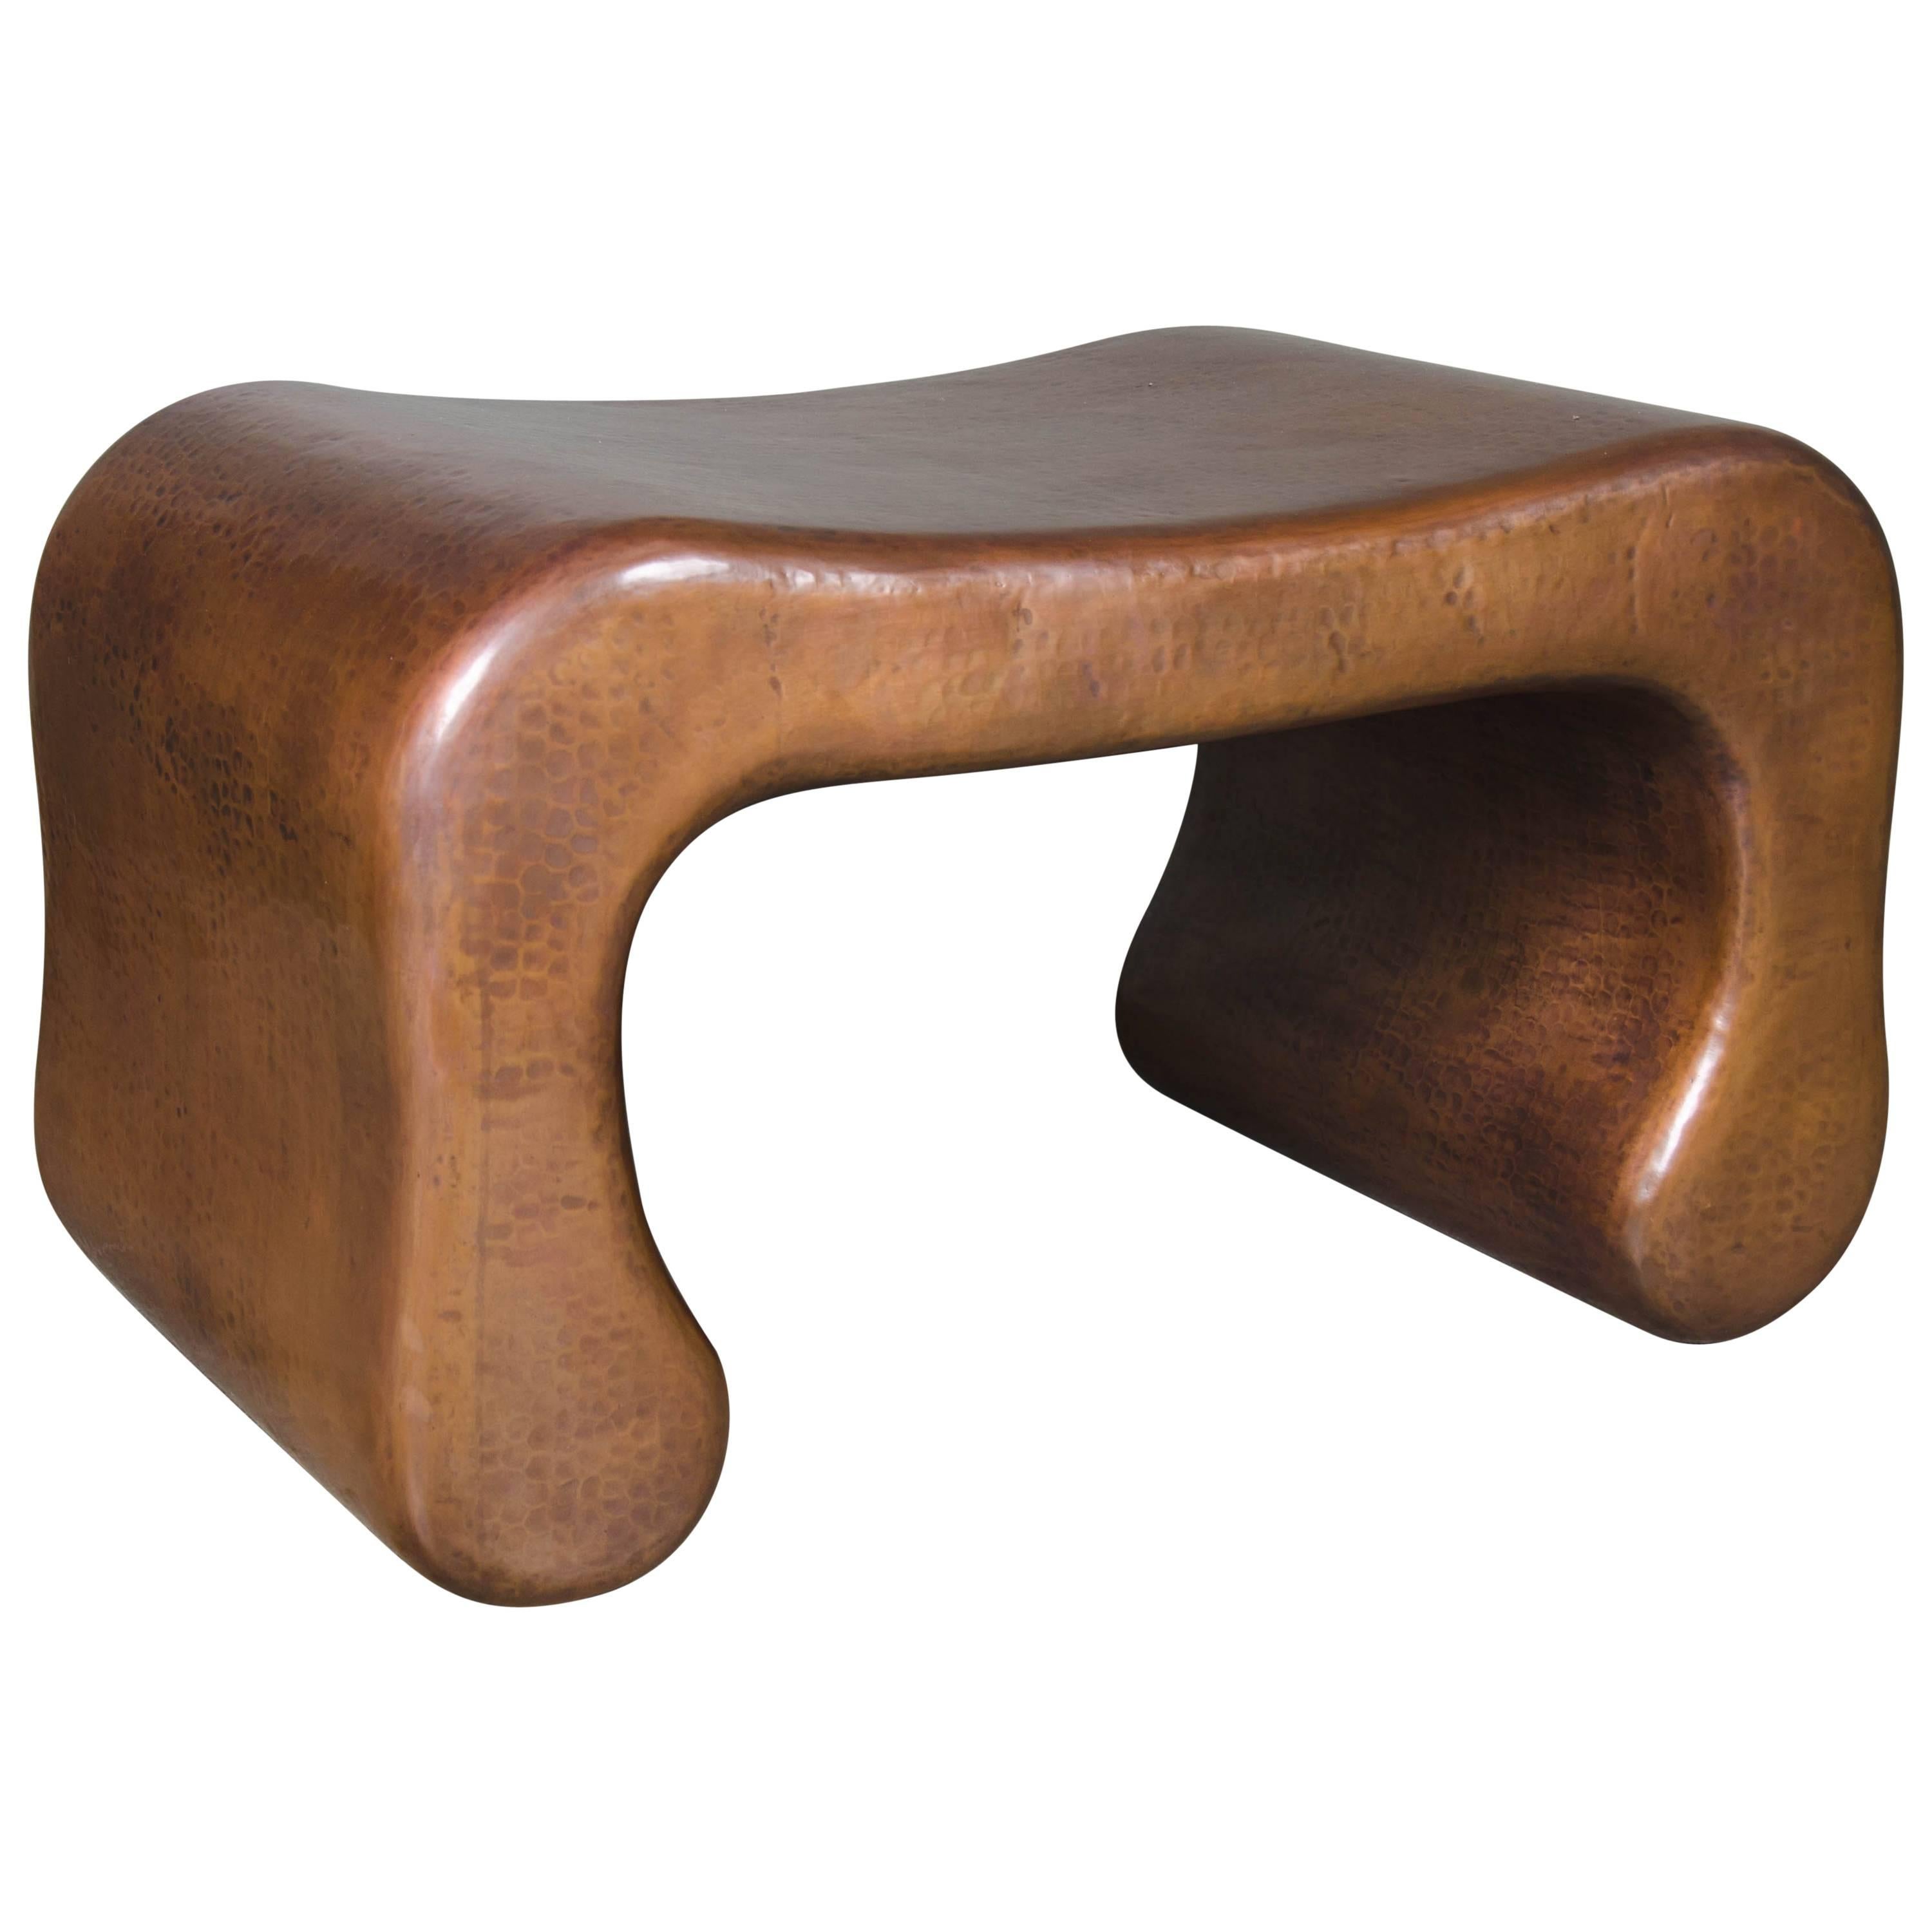 Pong Leg Seat, Copper by Robert Kuo, Limited Edition, In Stock For Sale